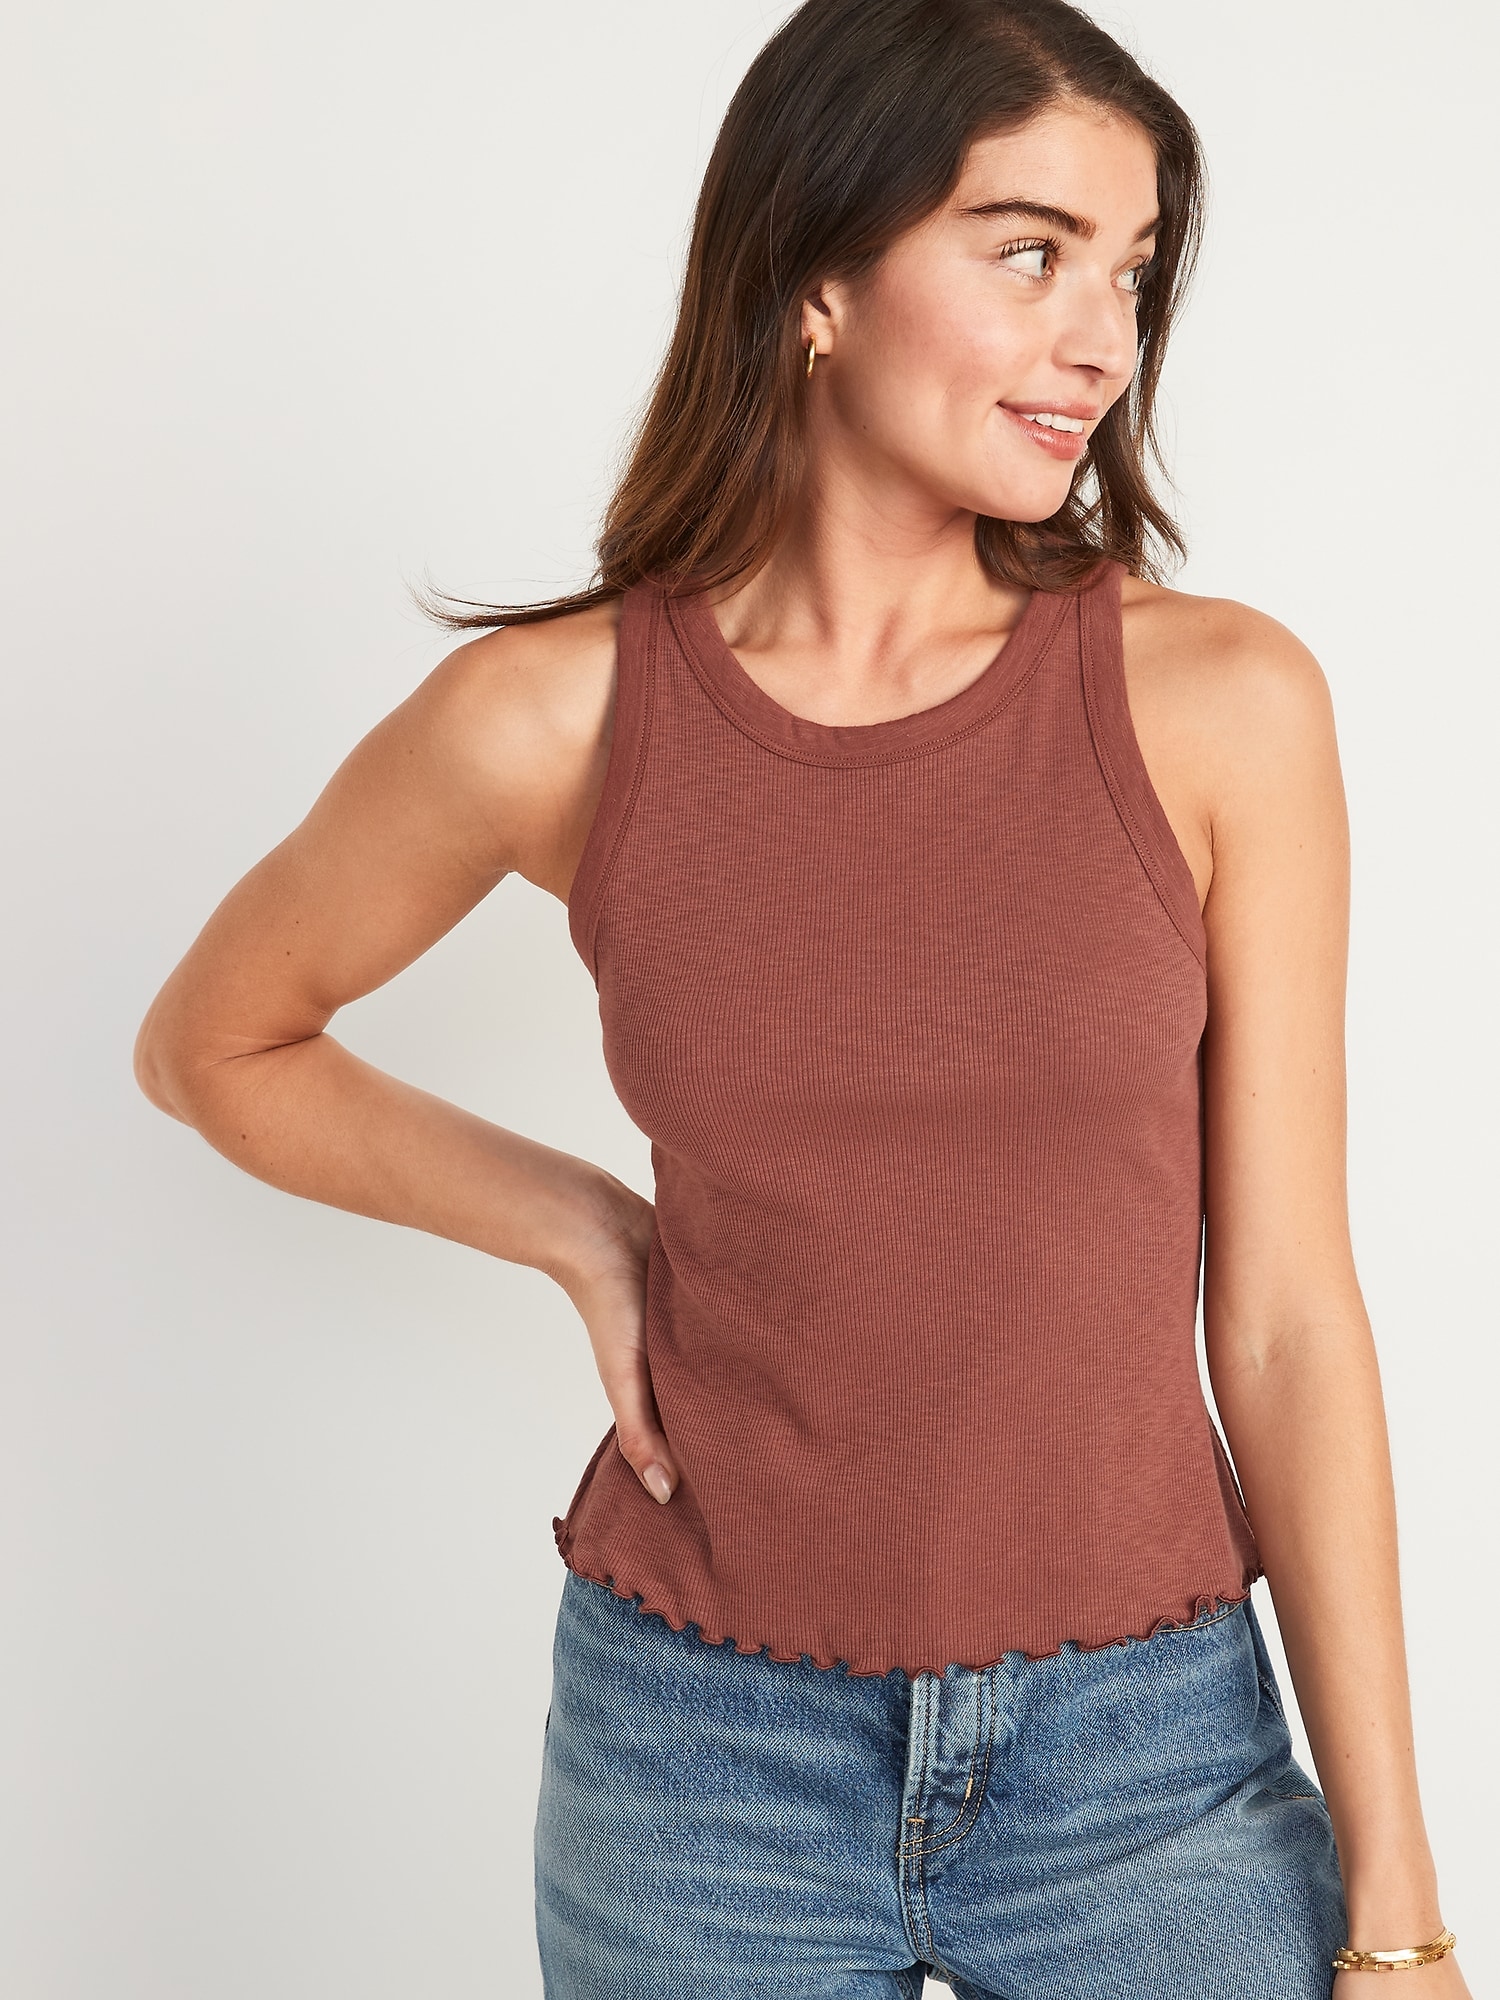 Fitted Rib-Knit Tank Top, Old Navy